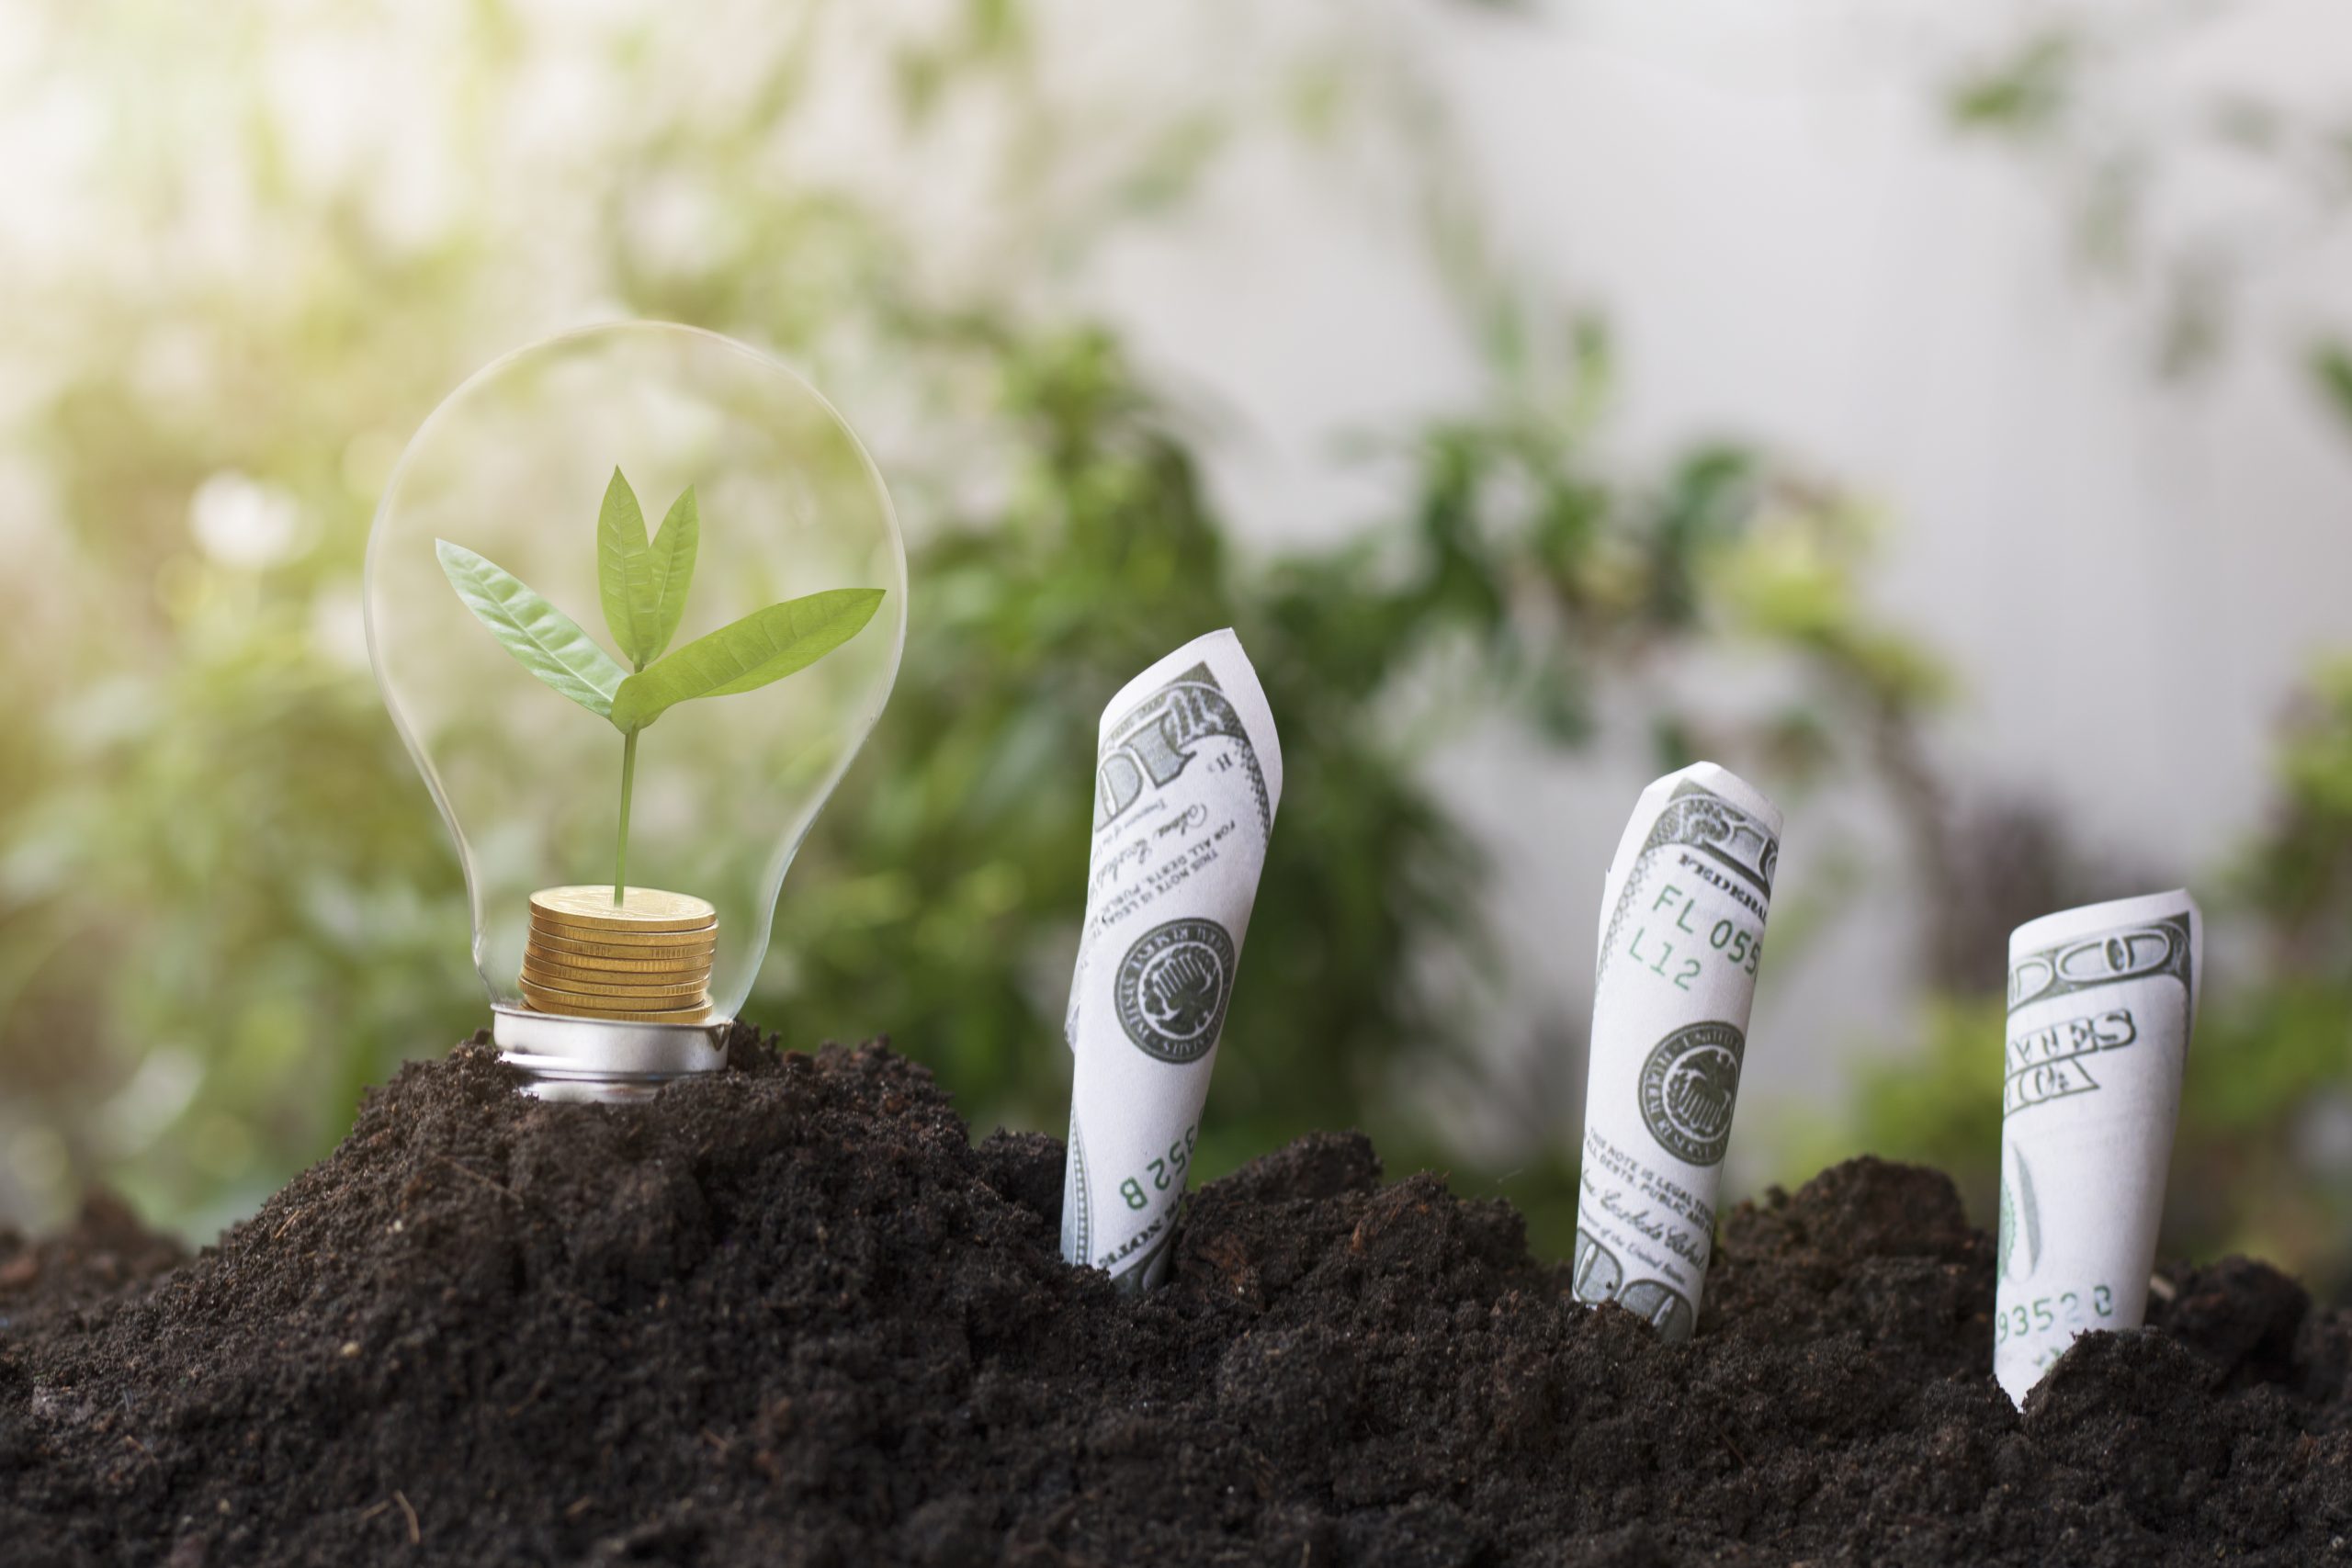 Destiny Capital image of light bulb and dollars to represent ESG investing